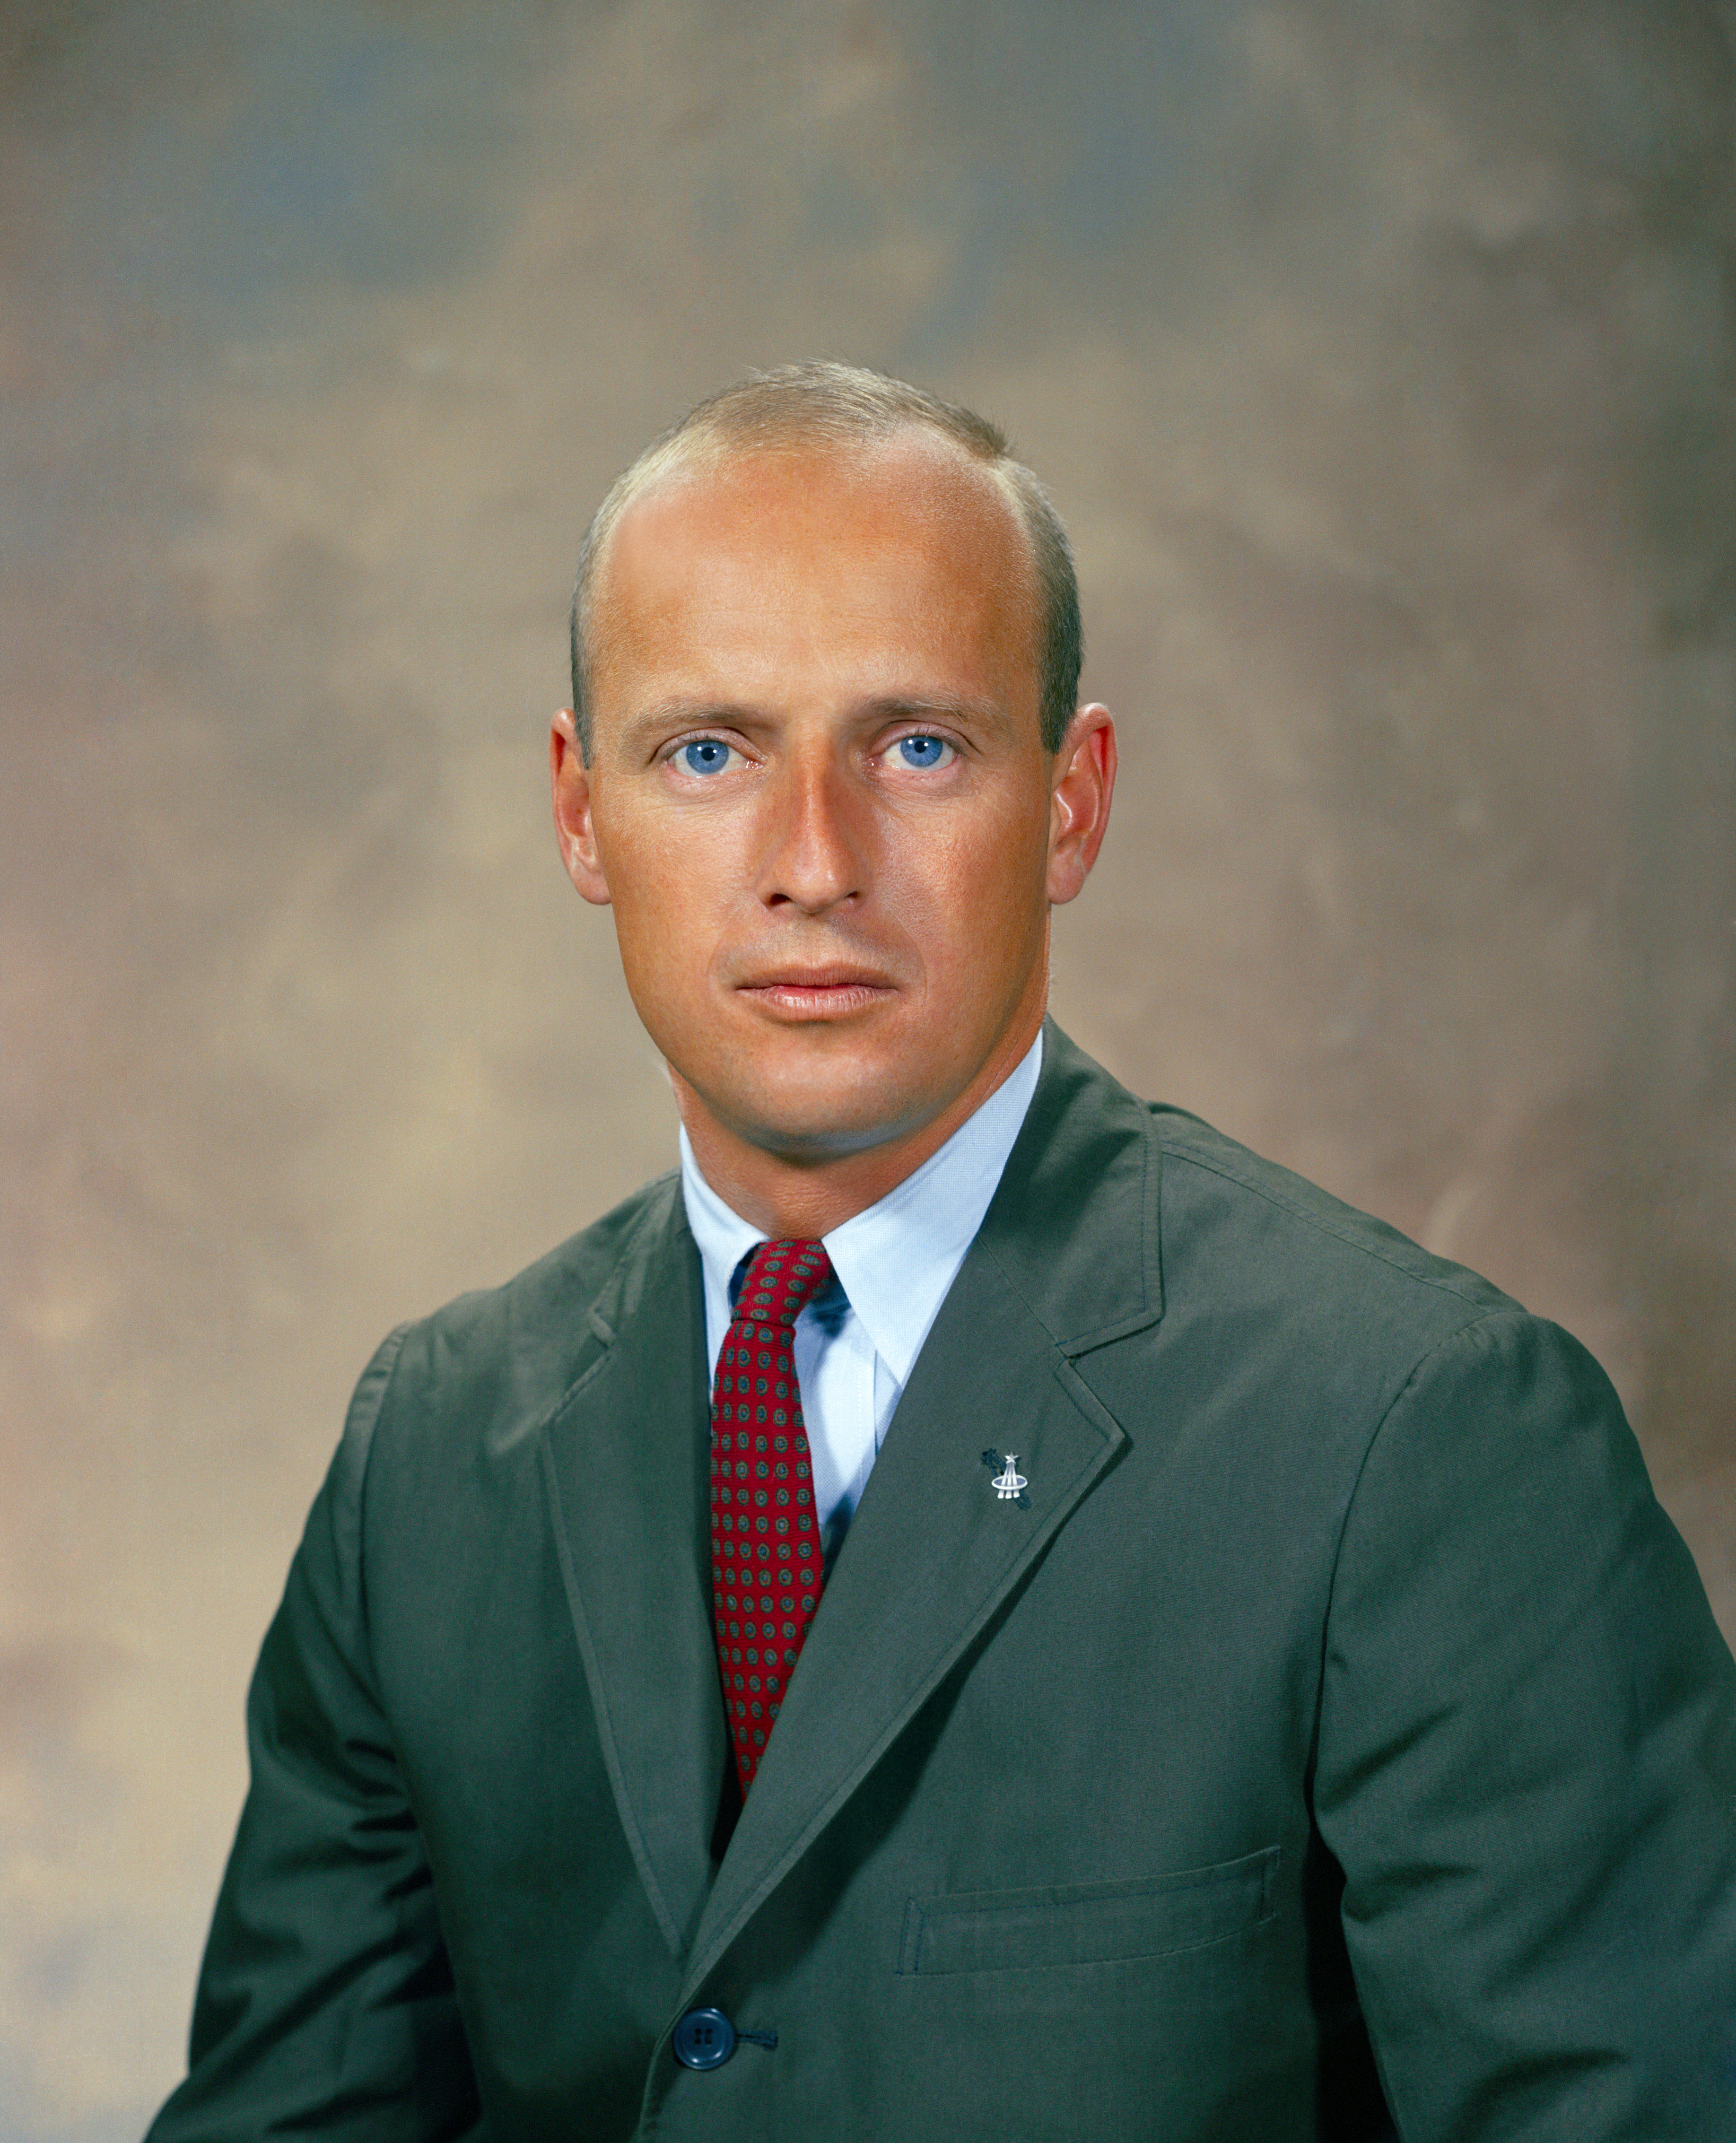 Headshot of a man in a green jacket and red tie